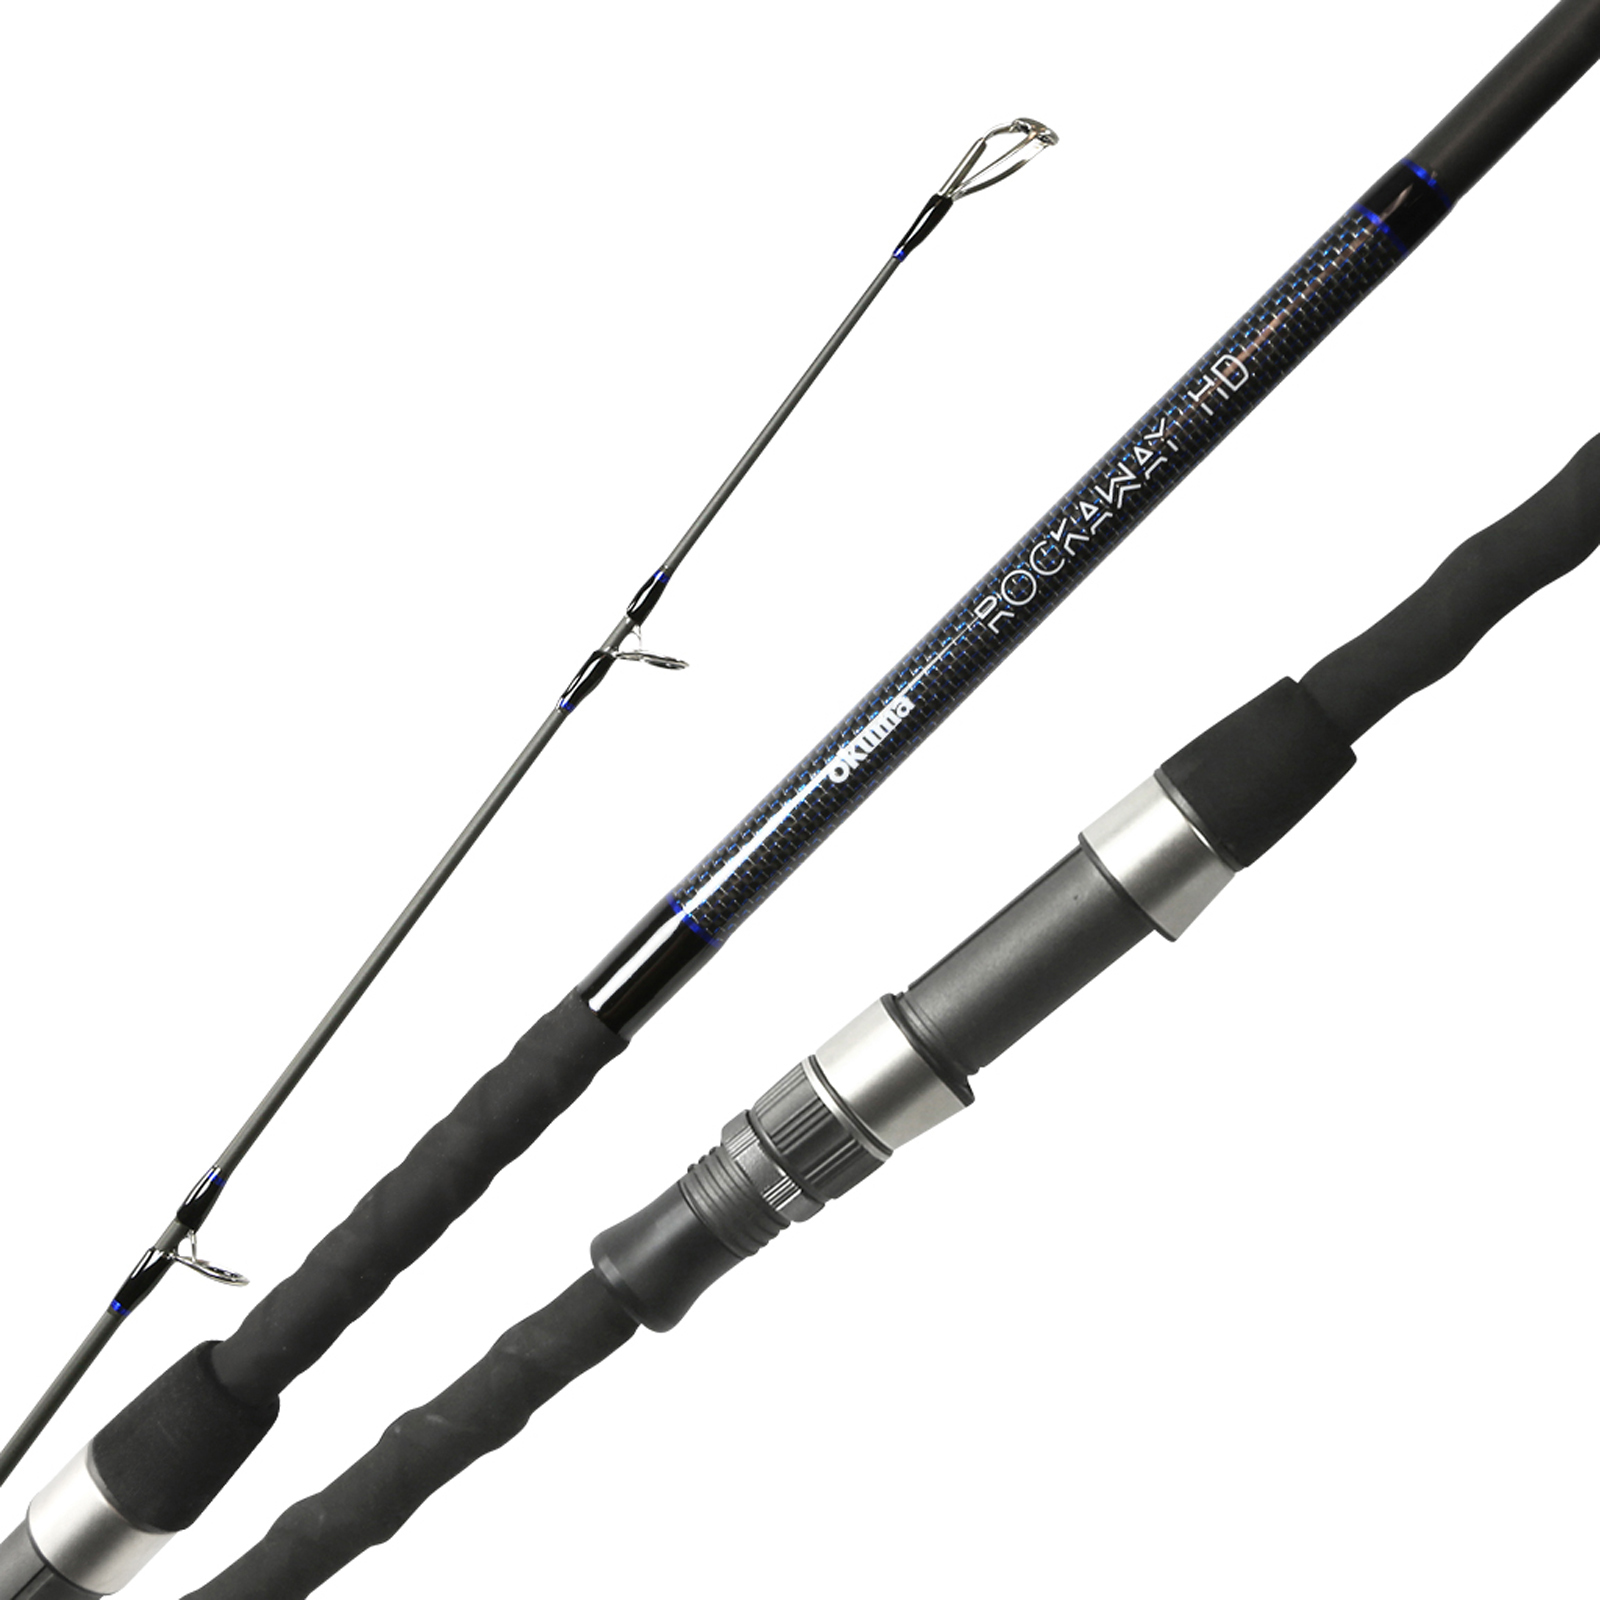 Okuma Rockway HD Surf Rod, 2 Piece, Low Resin Carbon Rod, Blank Double Lock  Reel Seat Zirconim Eye Inserts Reinforced Rod, Tip , Up to $7.00 Off with  Free S&H — CampSaver